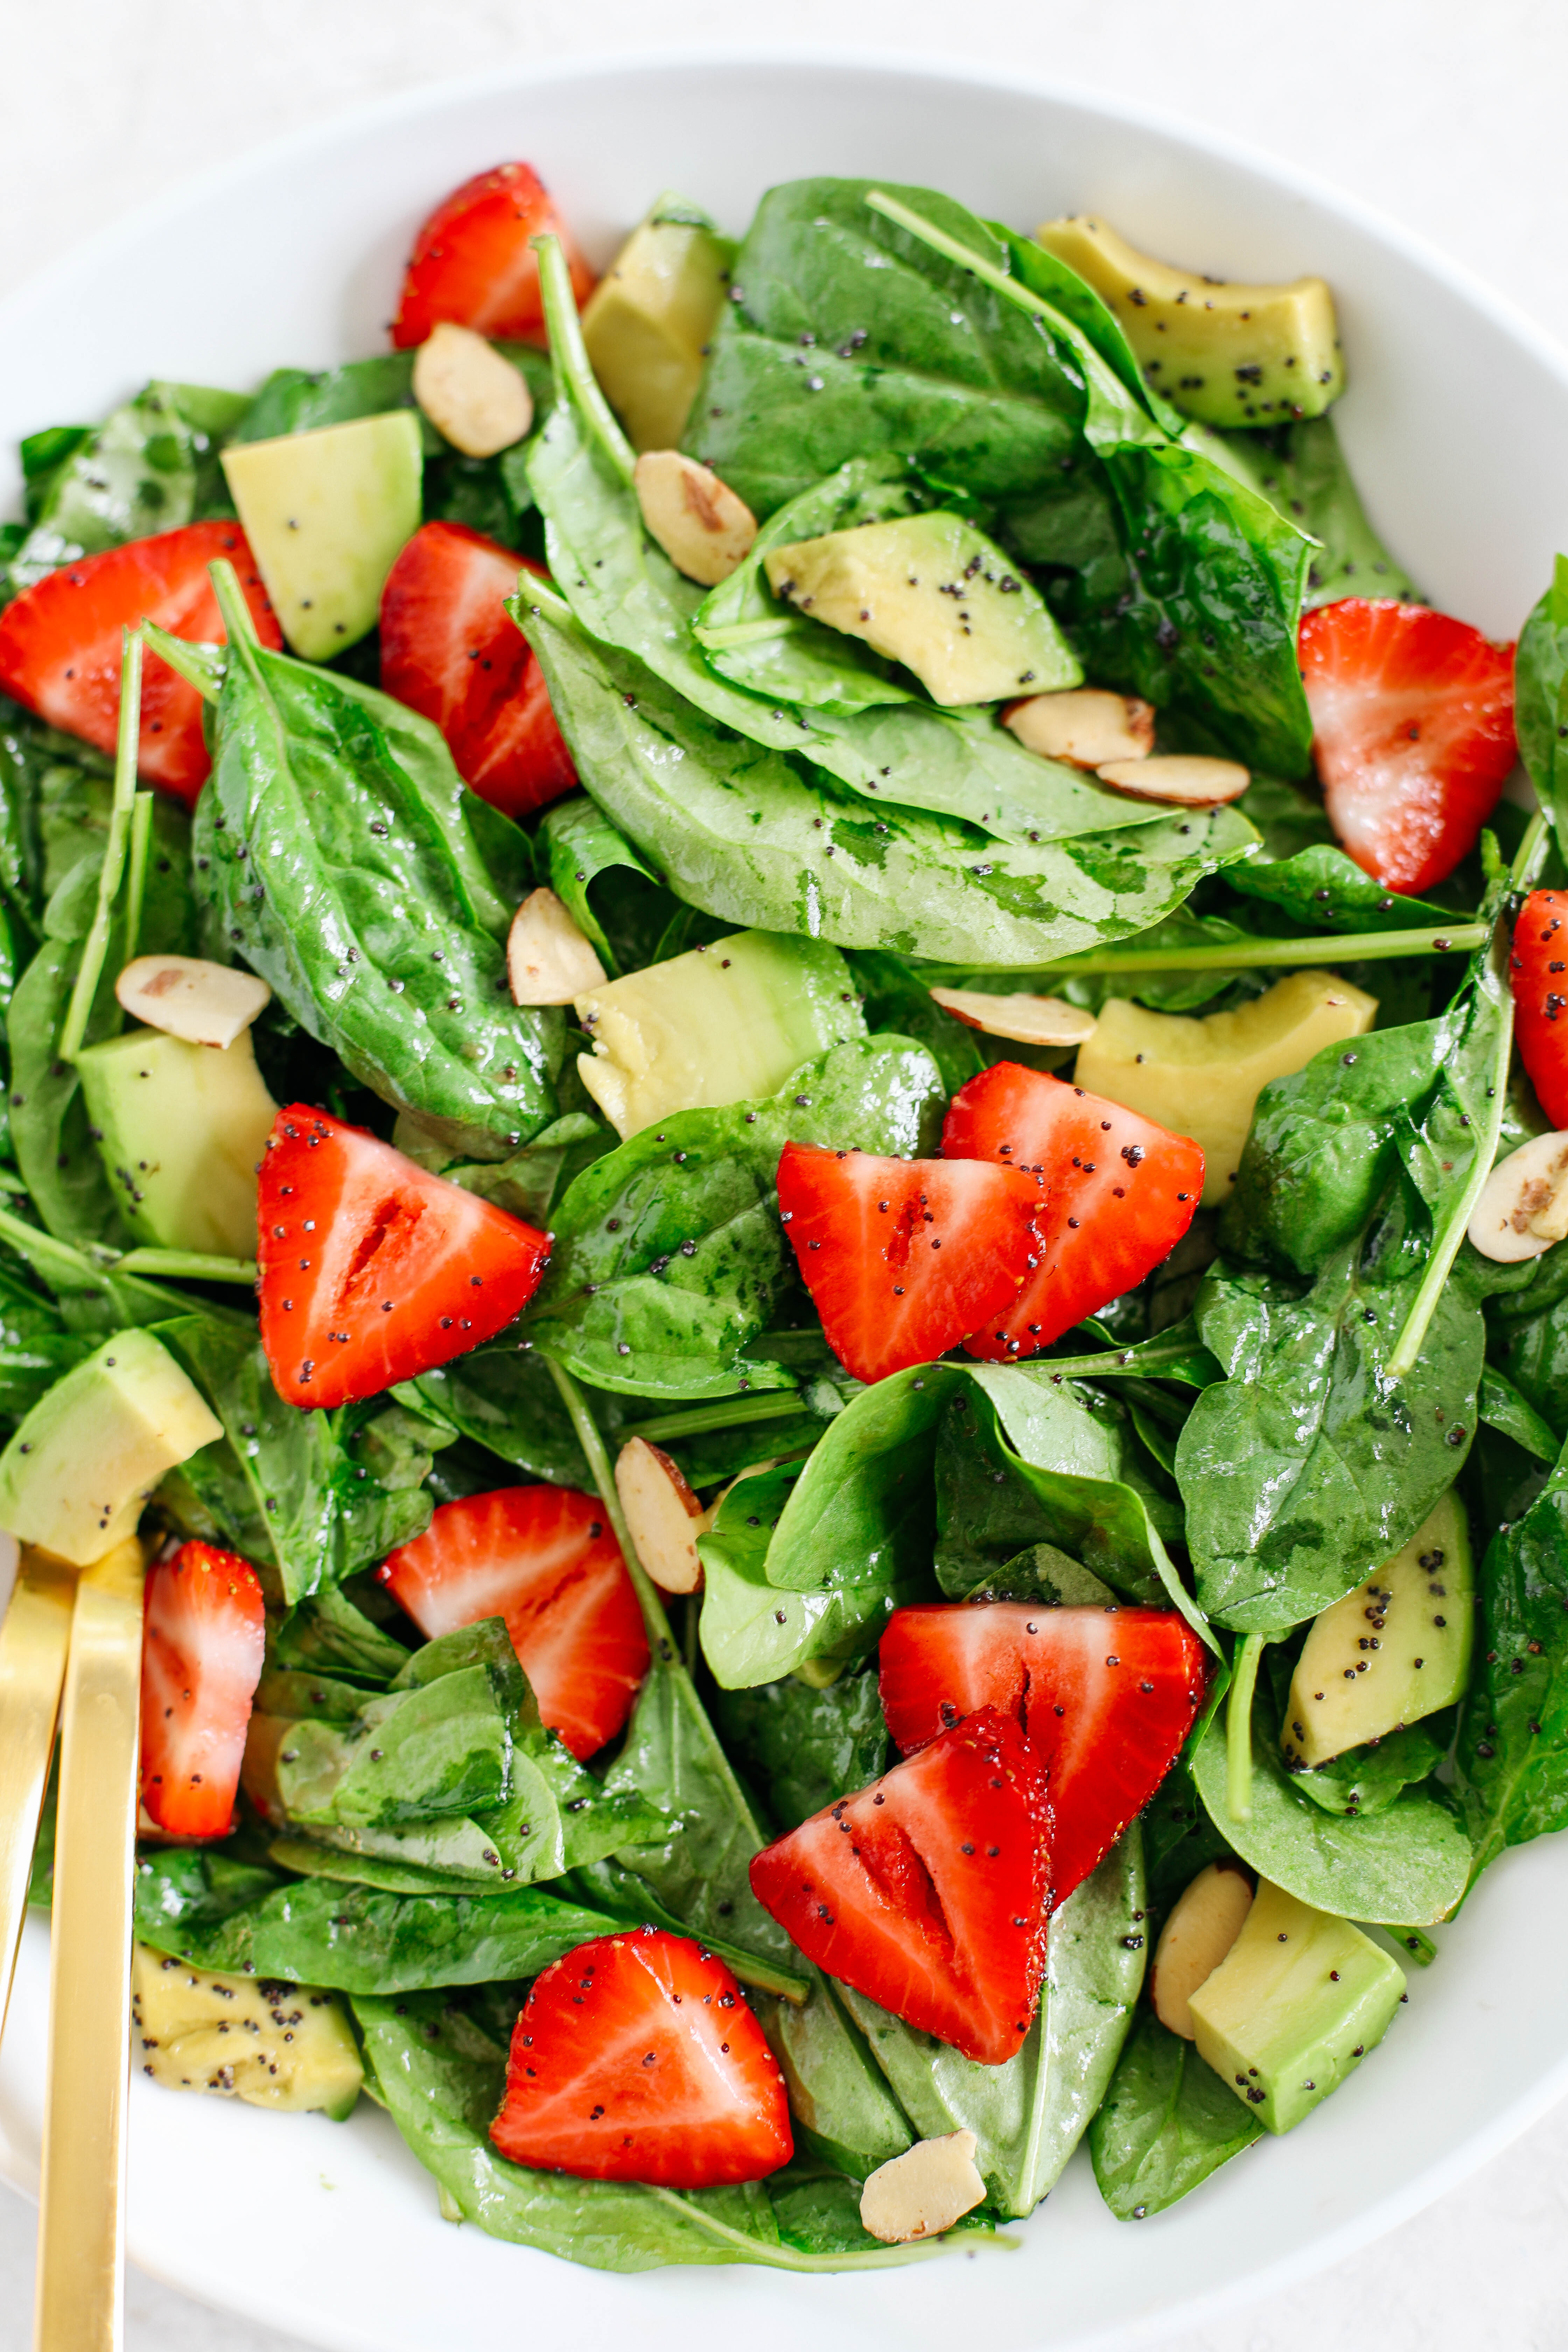 Super simple Strawberry Spinach Salad with Poppy Seed Dressing that is healthy, delicious and the perfect summer staple!